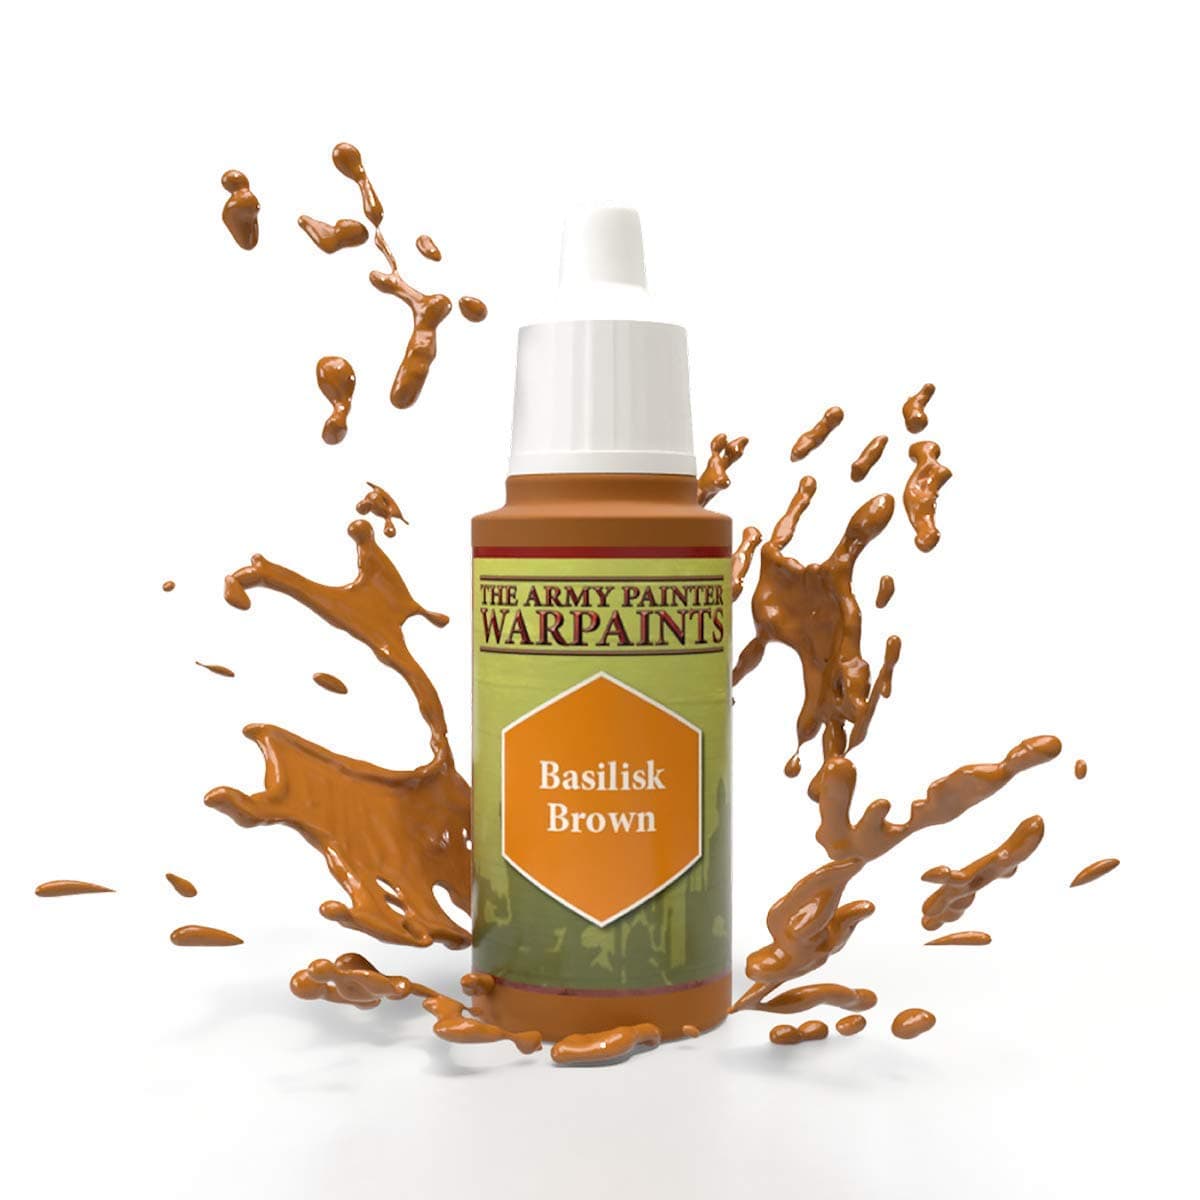 The Army Painter Accessories The Army Painter Warpaints: Basilisk Brown 18ml